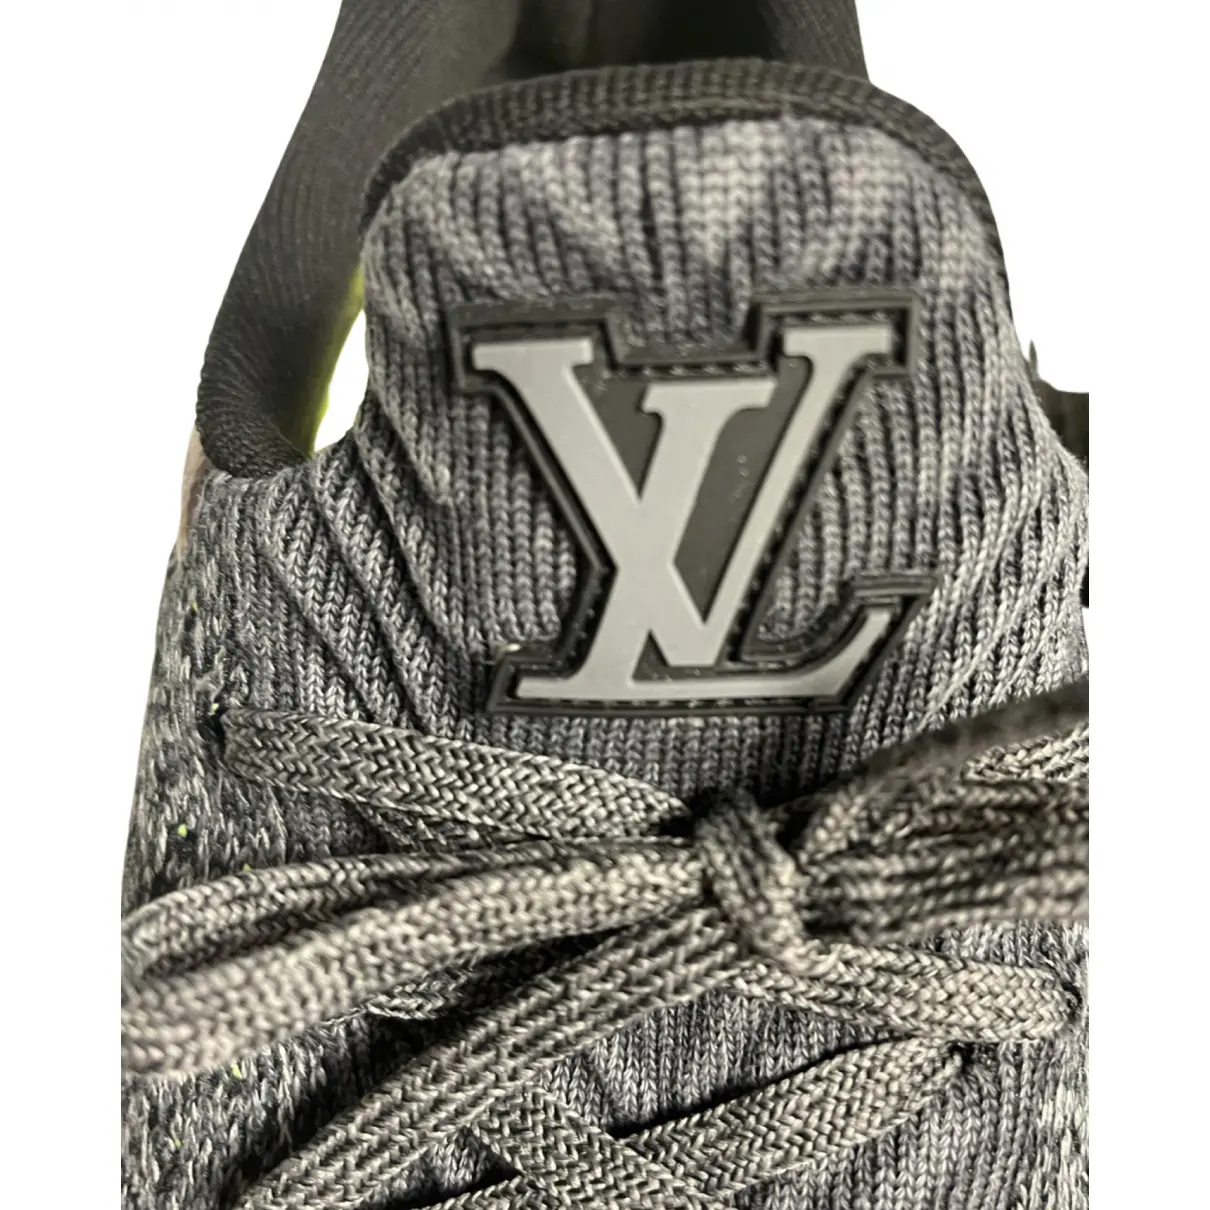 LV Runner Active low trainers Louis Vuitton